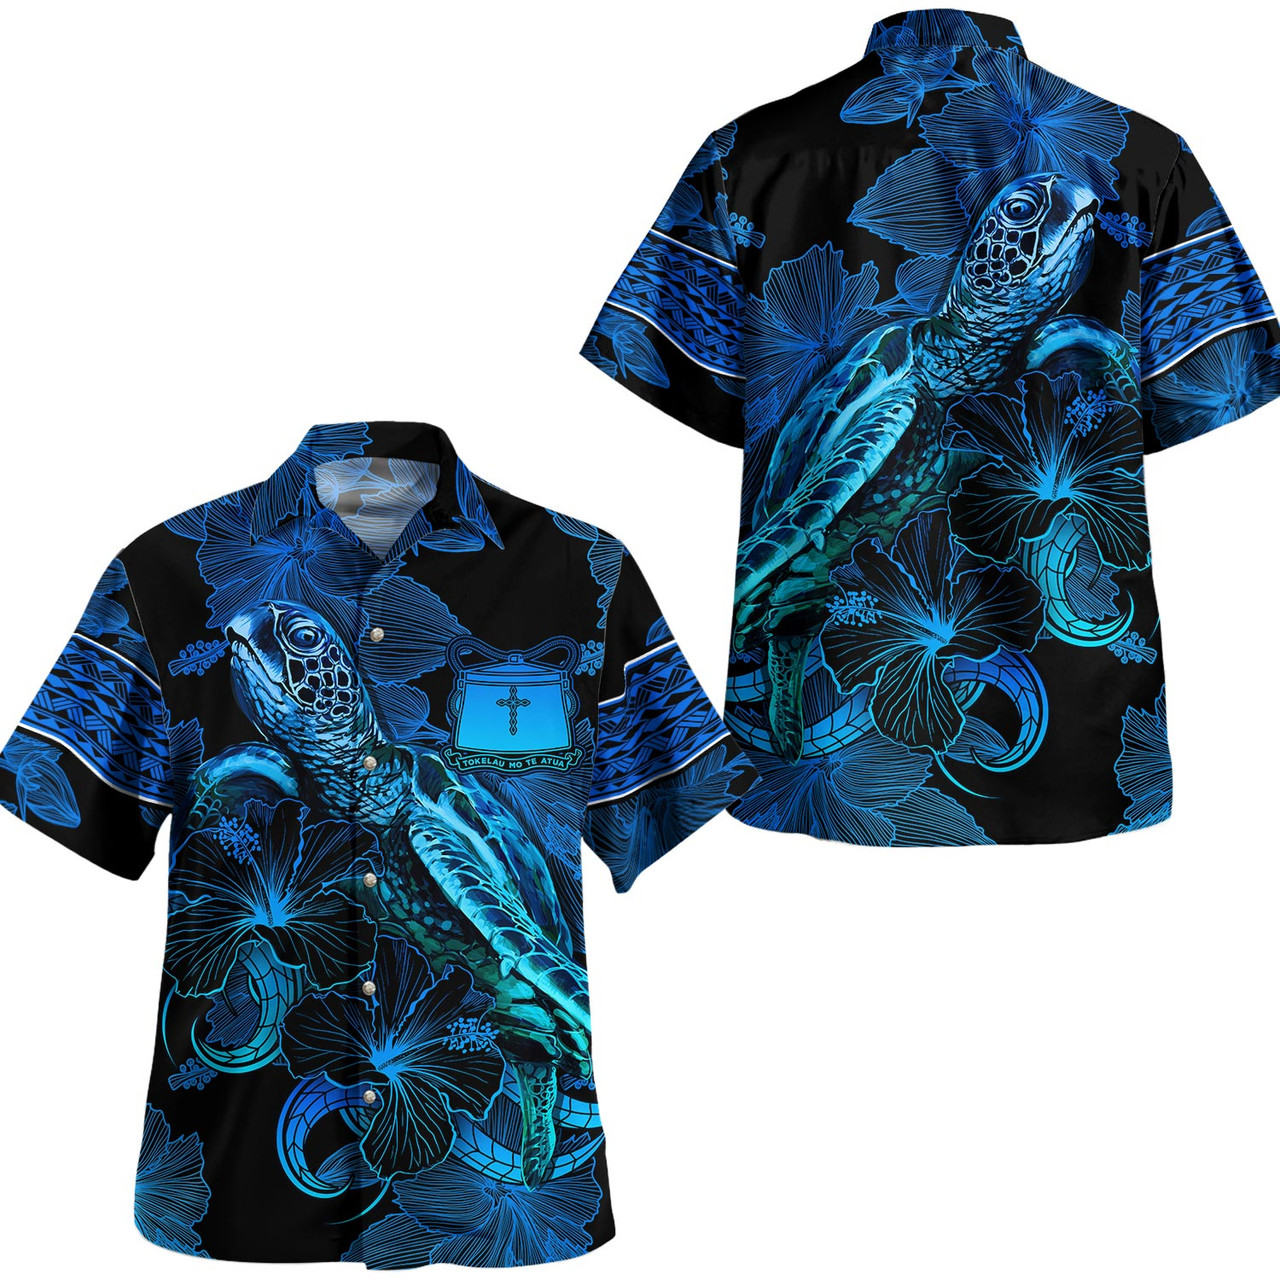 Tokelau Combo Puletasi And Shirt Sea Turtle With Blooming Hibiscus Flowers Tribal Blue